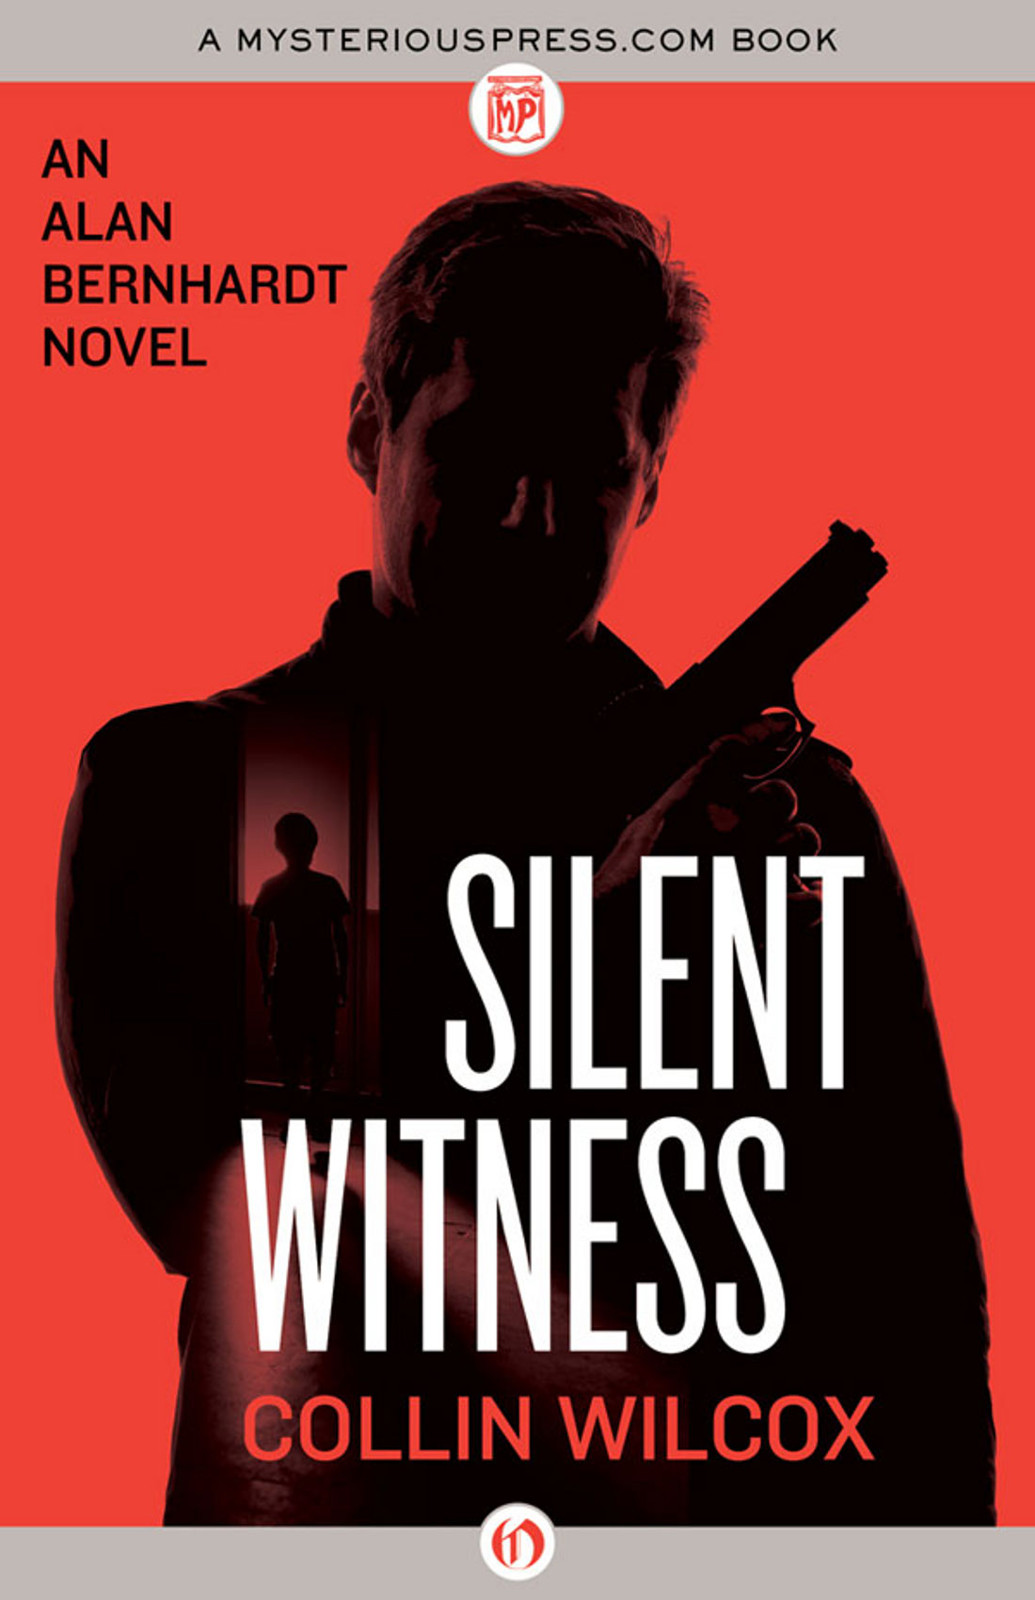 Silent Witness by Collin Wilcox